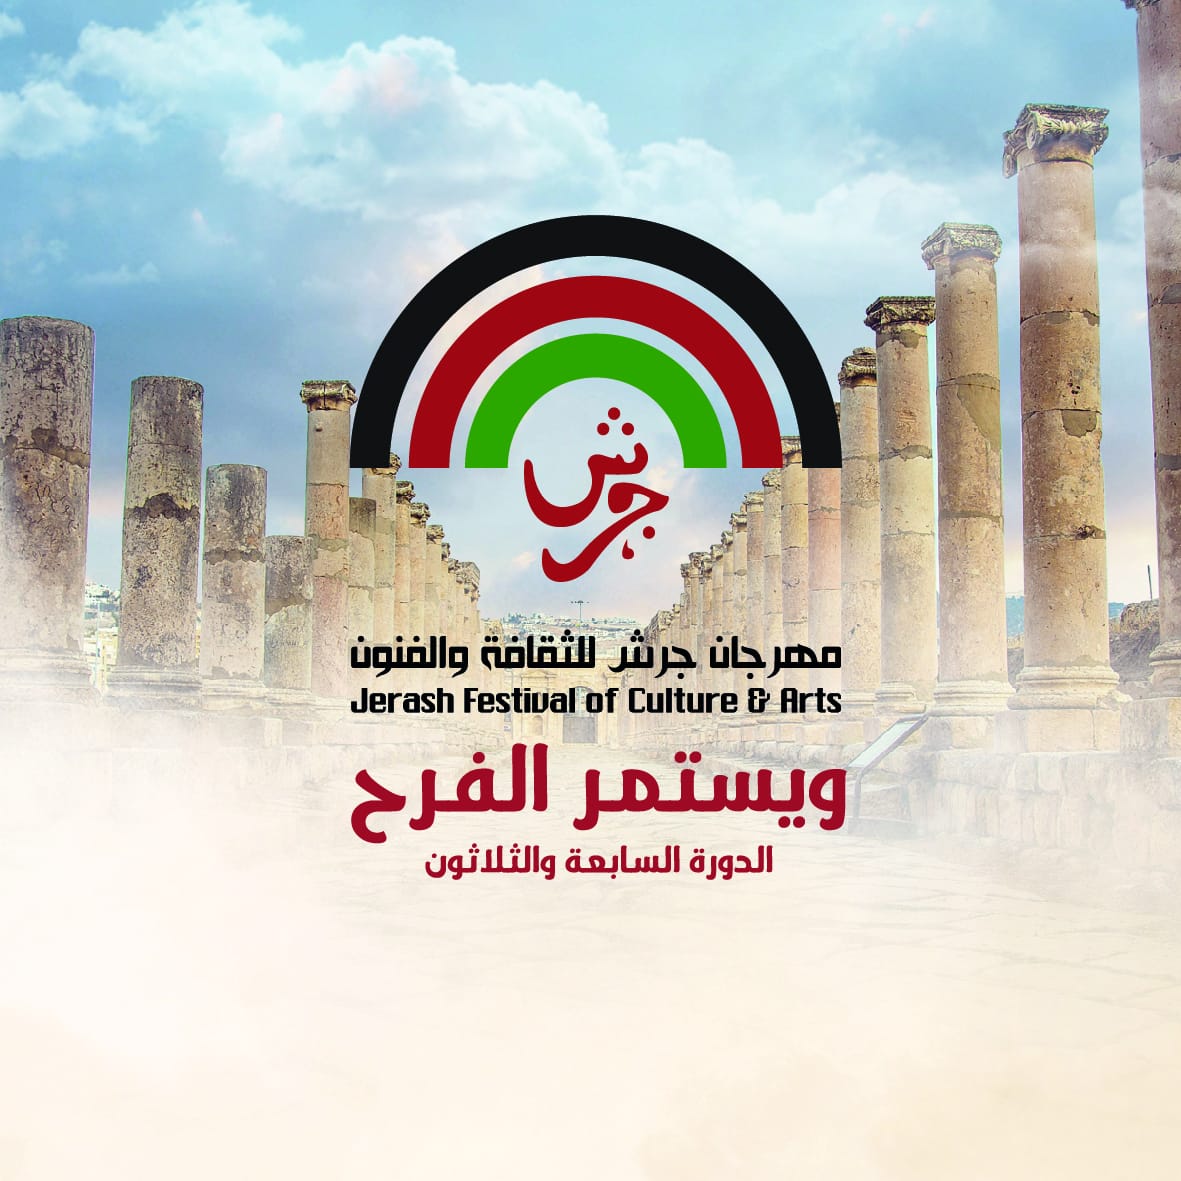 Jerash Festival for Culture and Arts holds a press conference to announce its activities